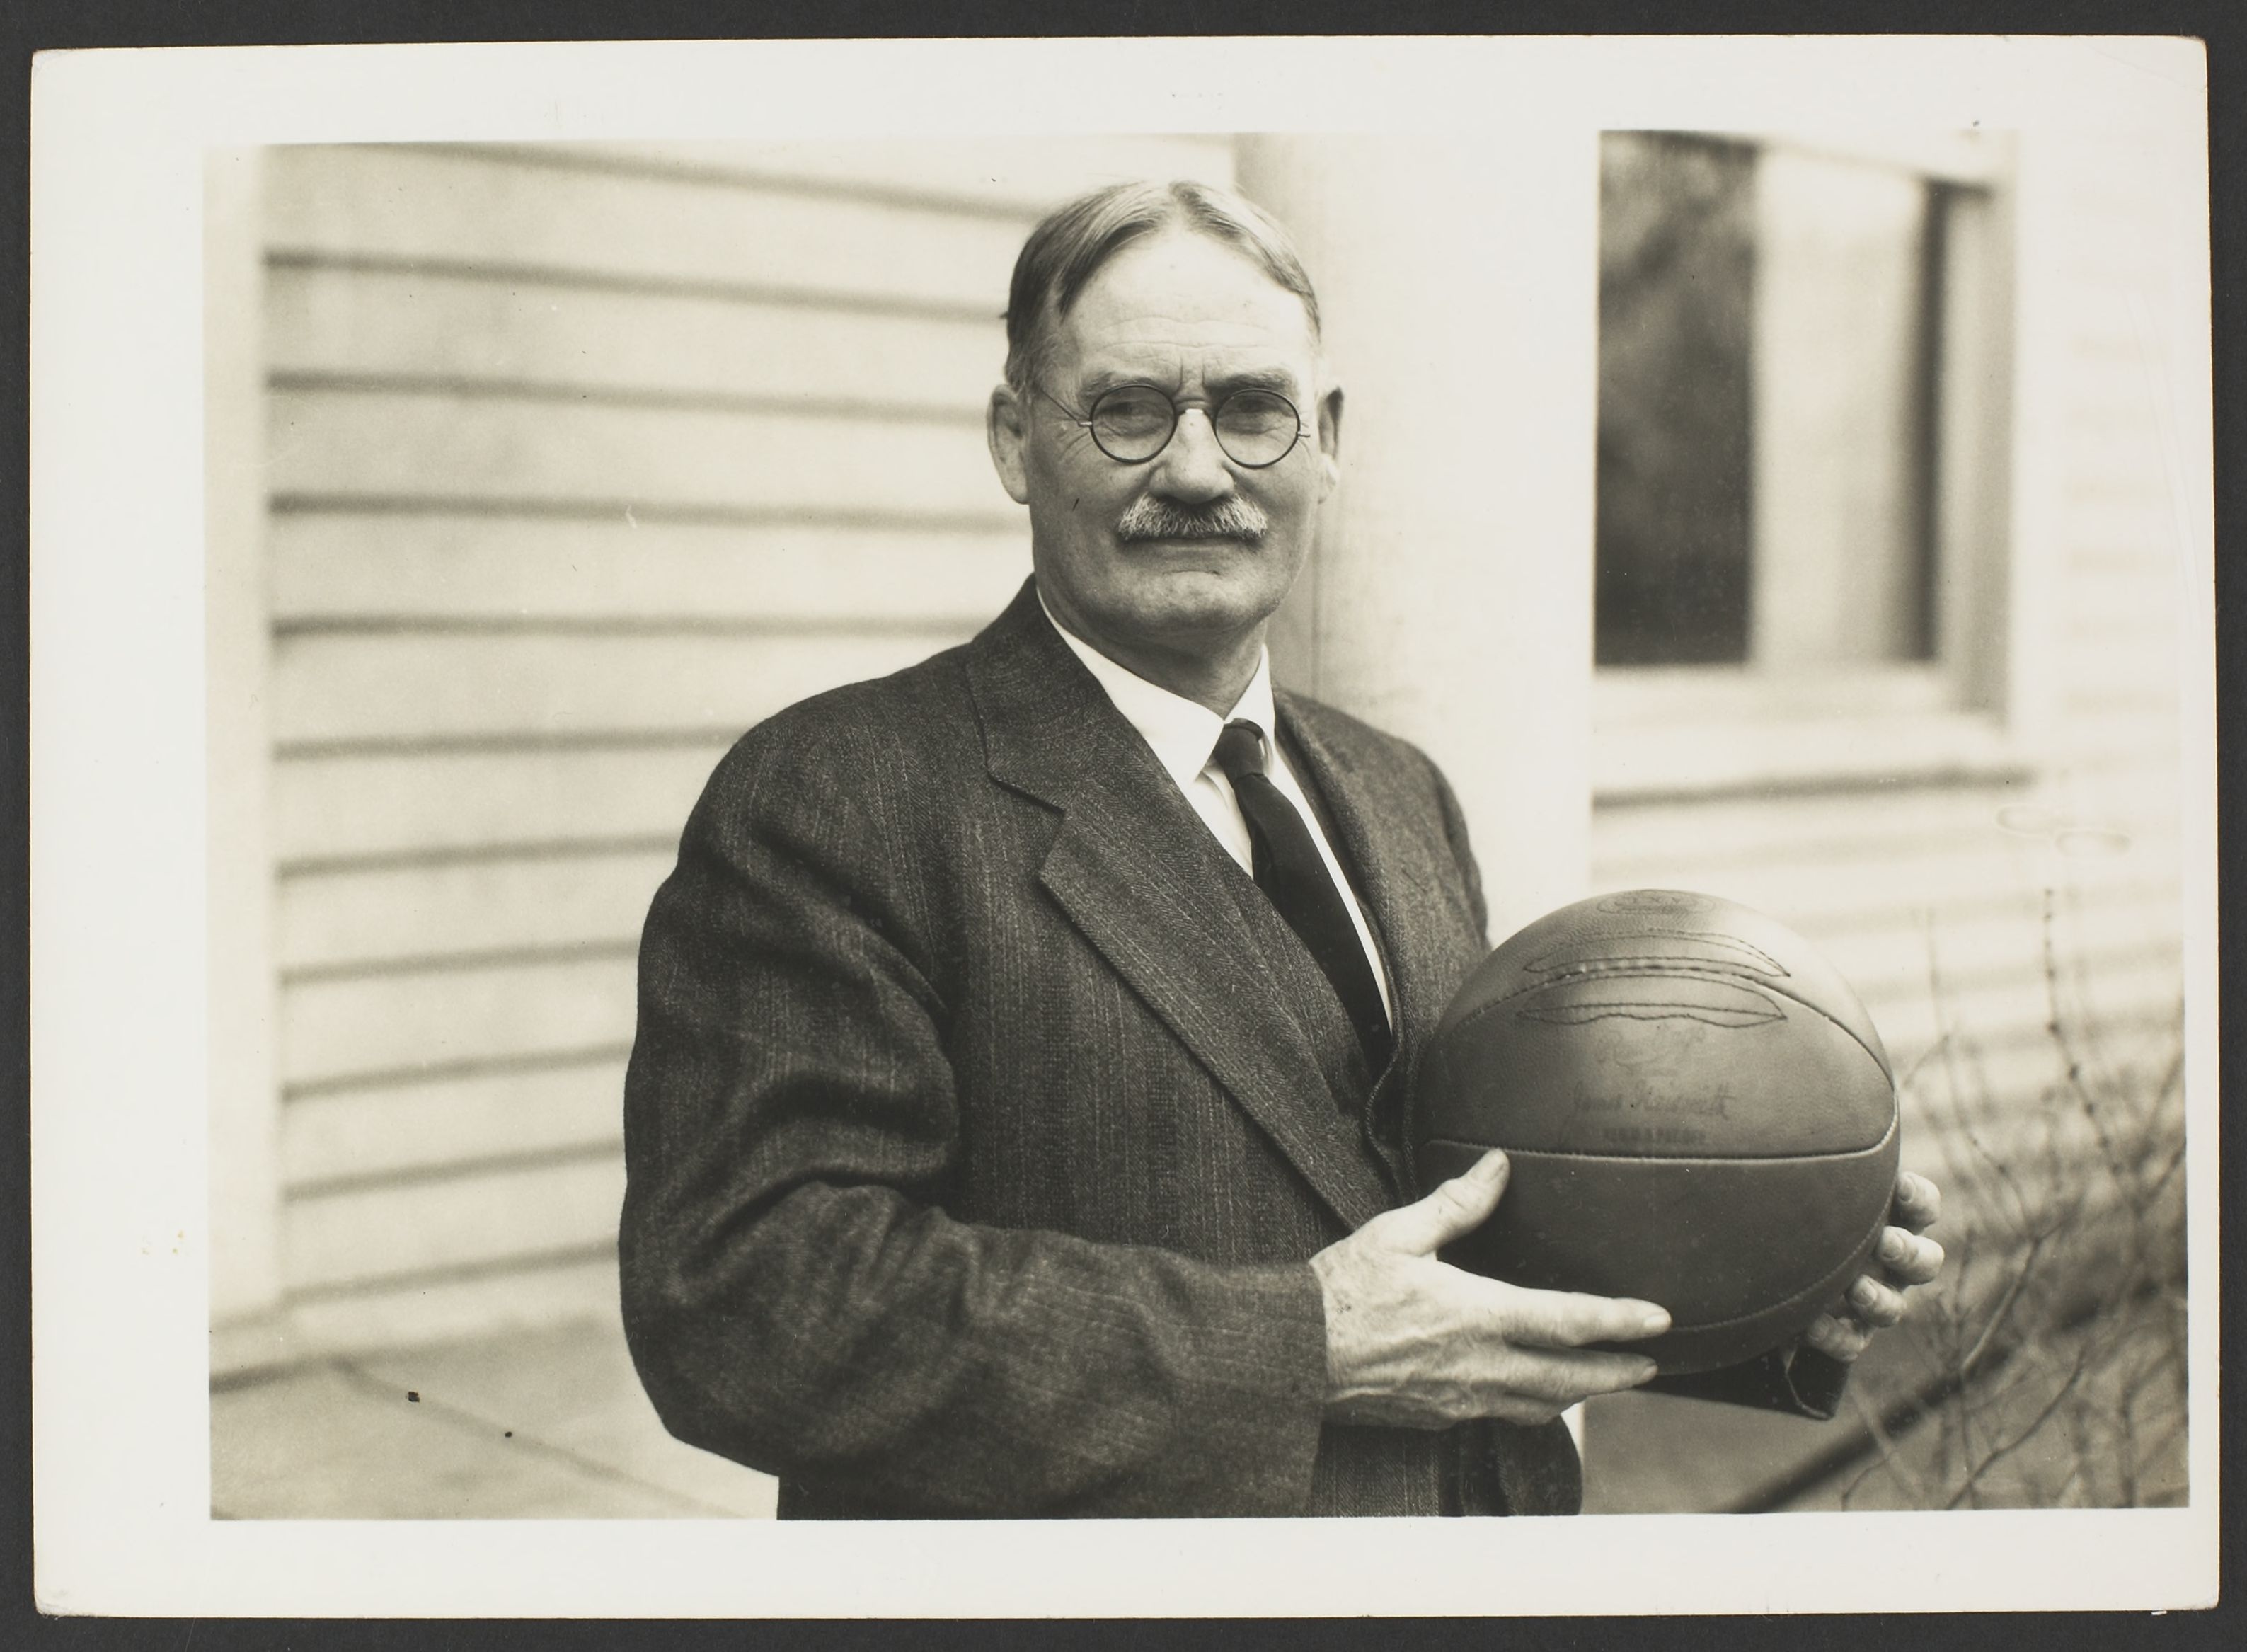 Sepia photograph of a man with a mustache and wire-framed glasses, wearing a suit and holding a basketball